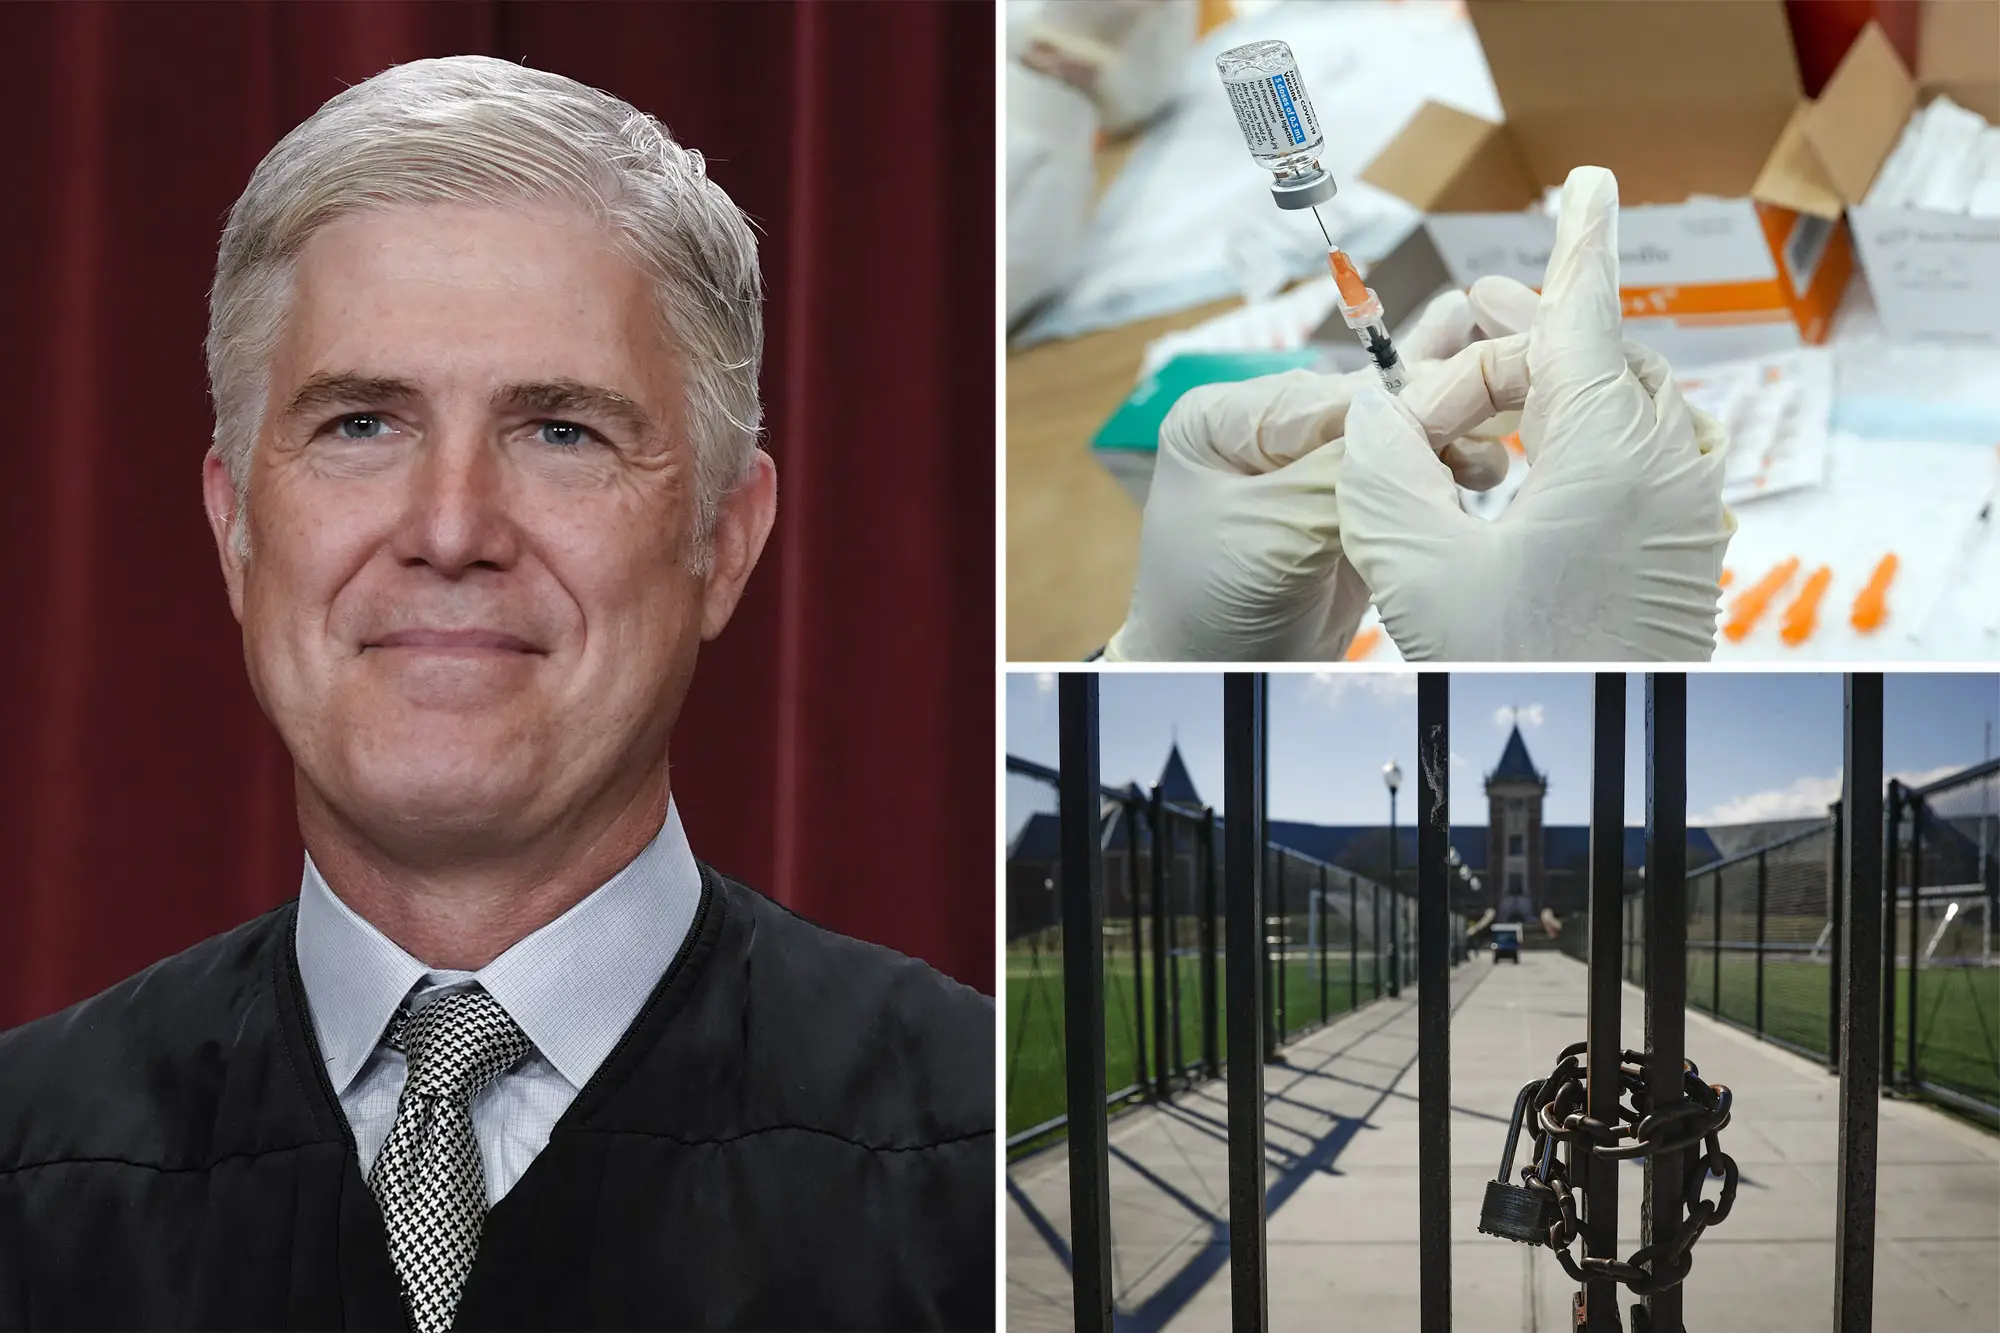 Justice Neil Gorsuch blasts COVID response as one of ‘greatest intrusions on civil liberties’